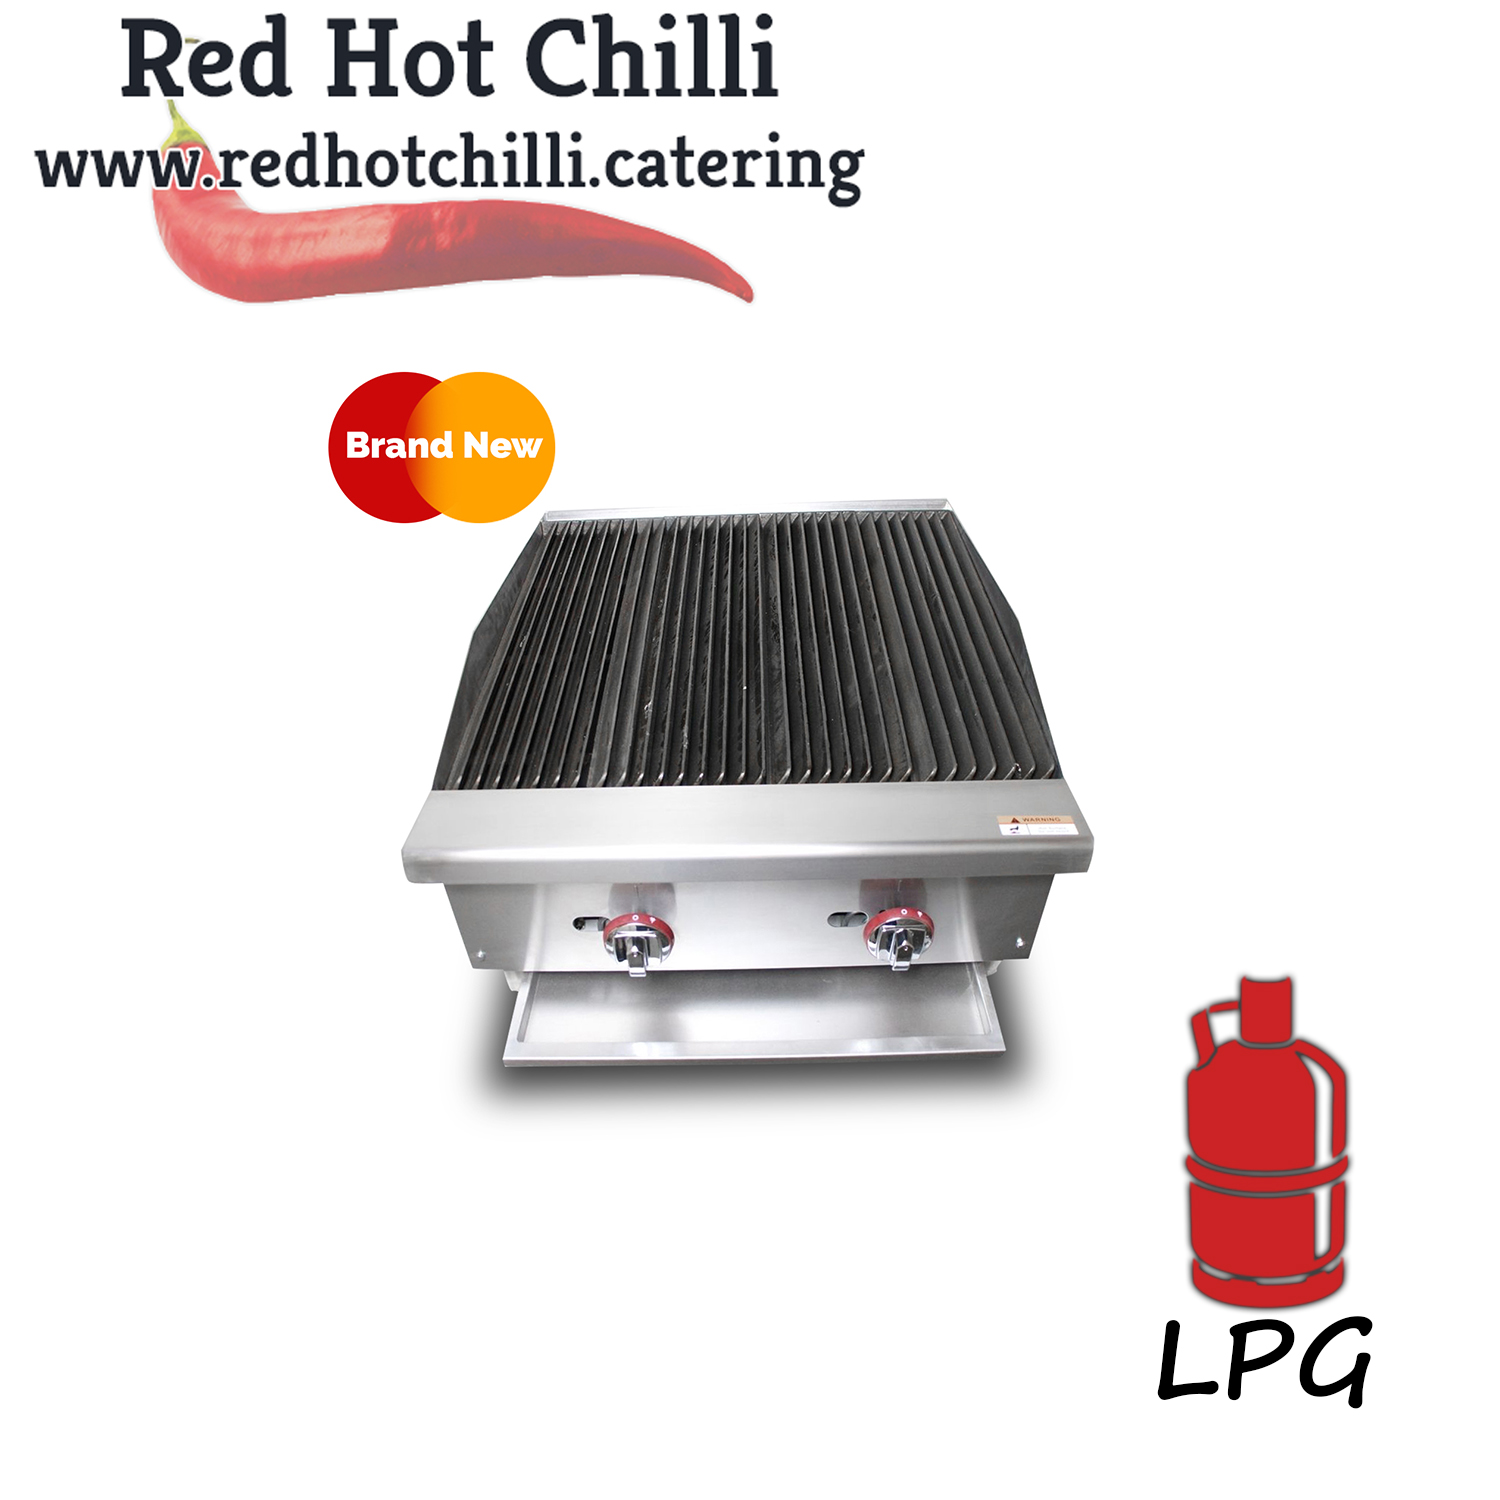 GAS CHAR-GRILL LAVA ROCK FALCON IMPERIAL PARRY GARLAND COMMERCIAL CATERING GRILL 